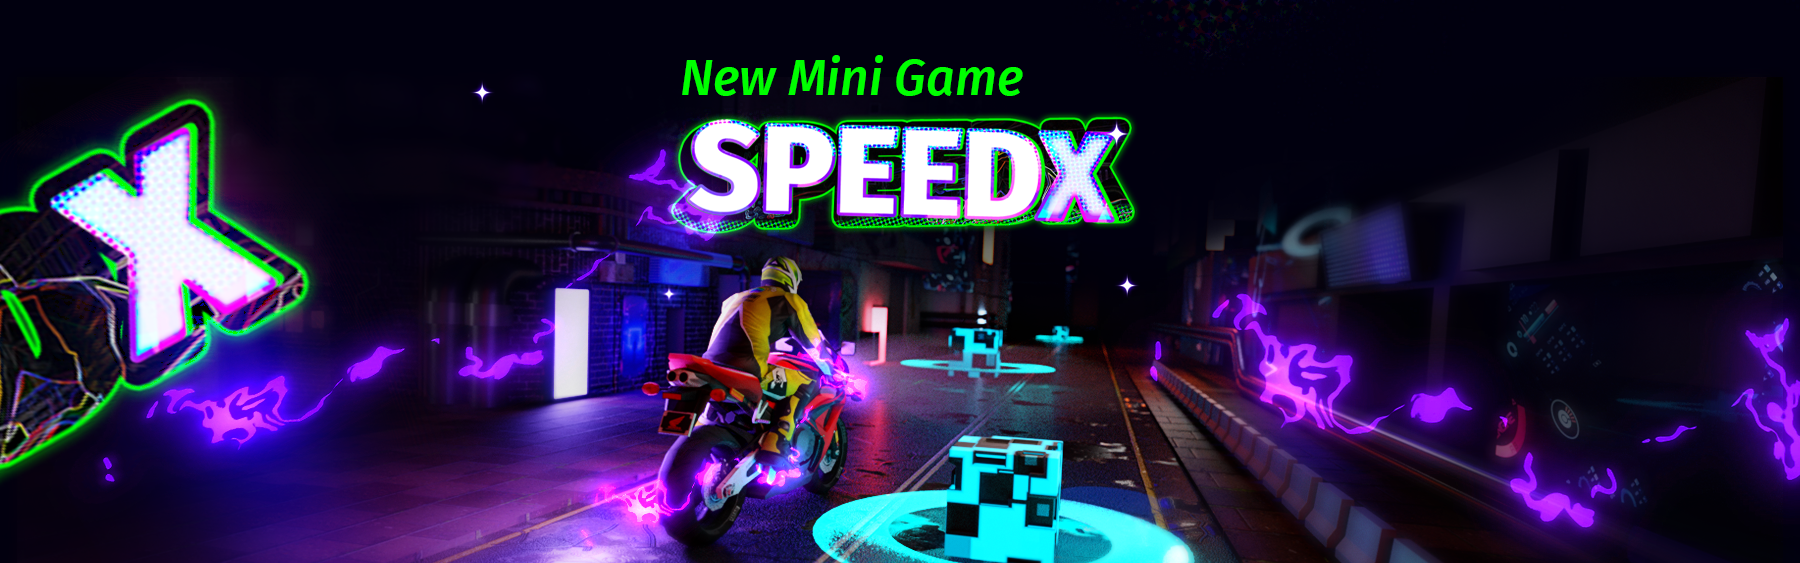 Upgaming launches a new mini game - SpeedX